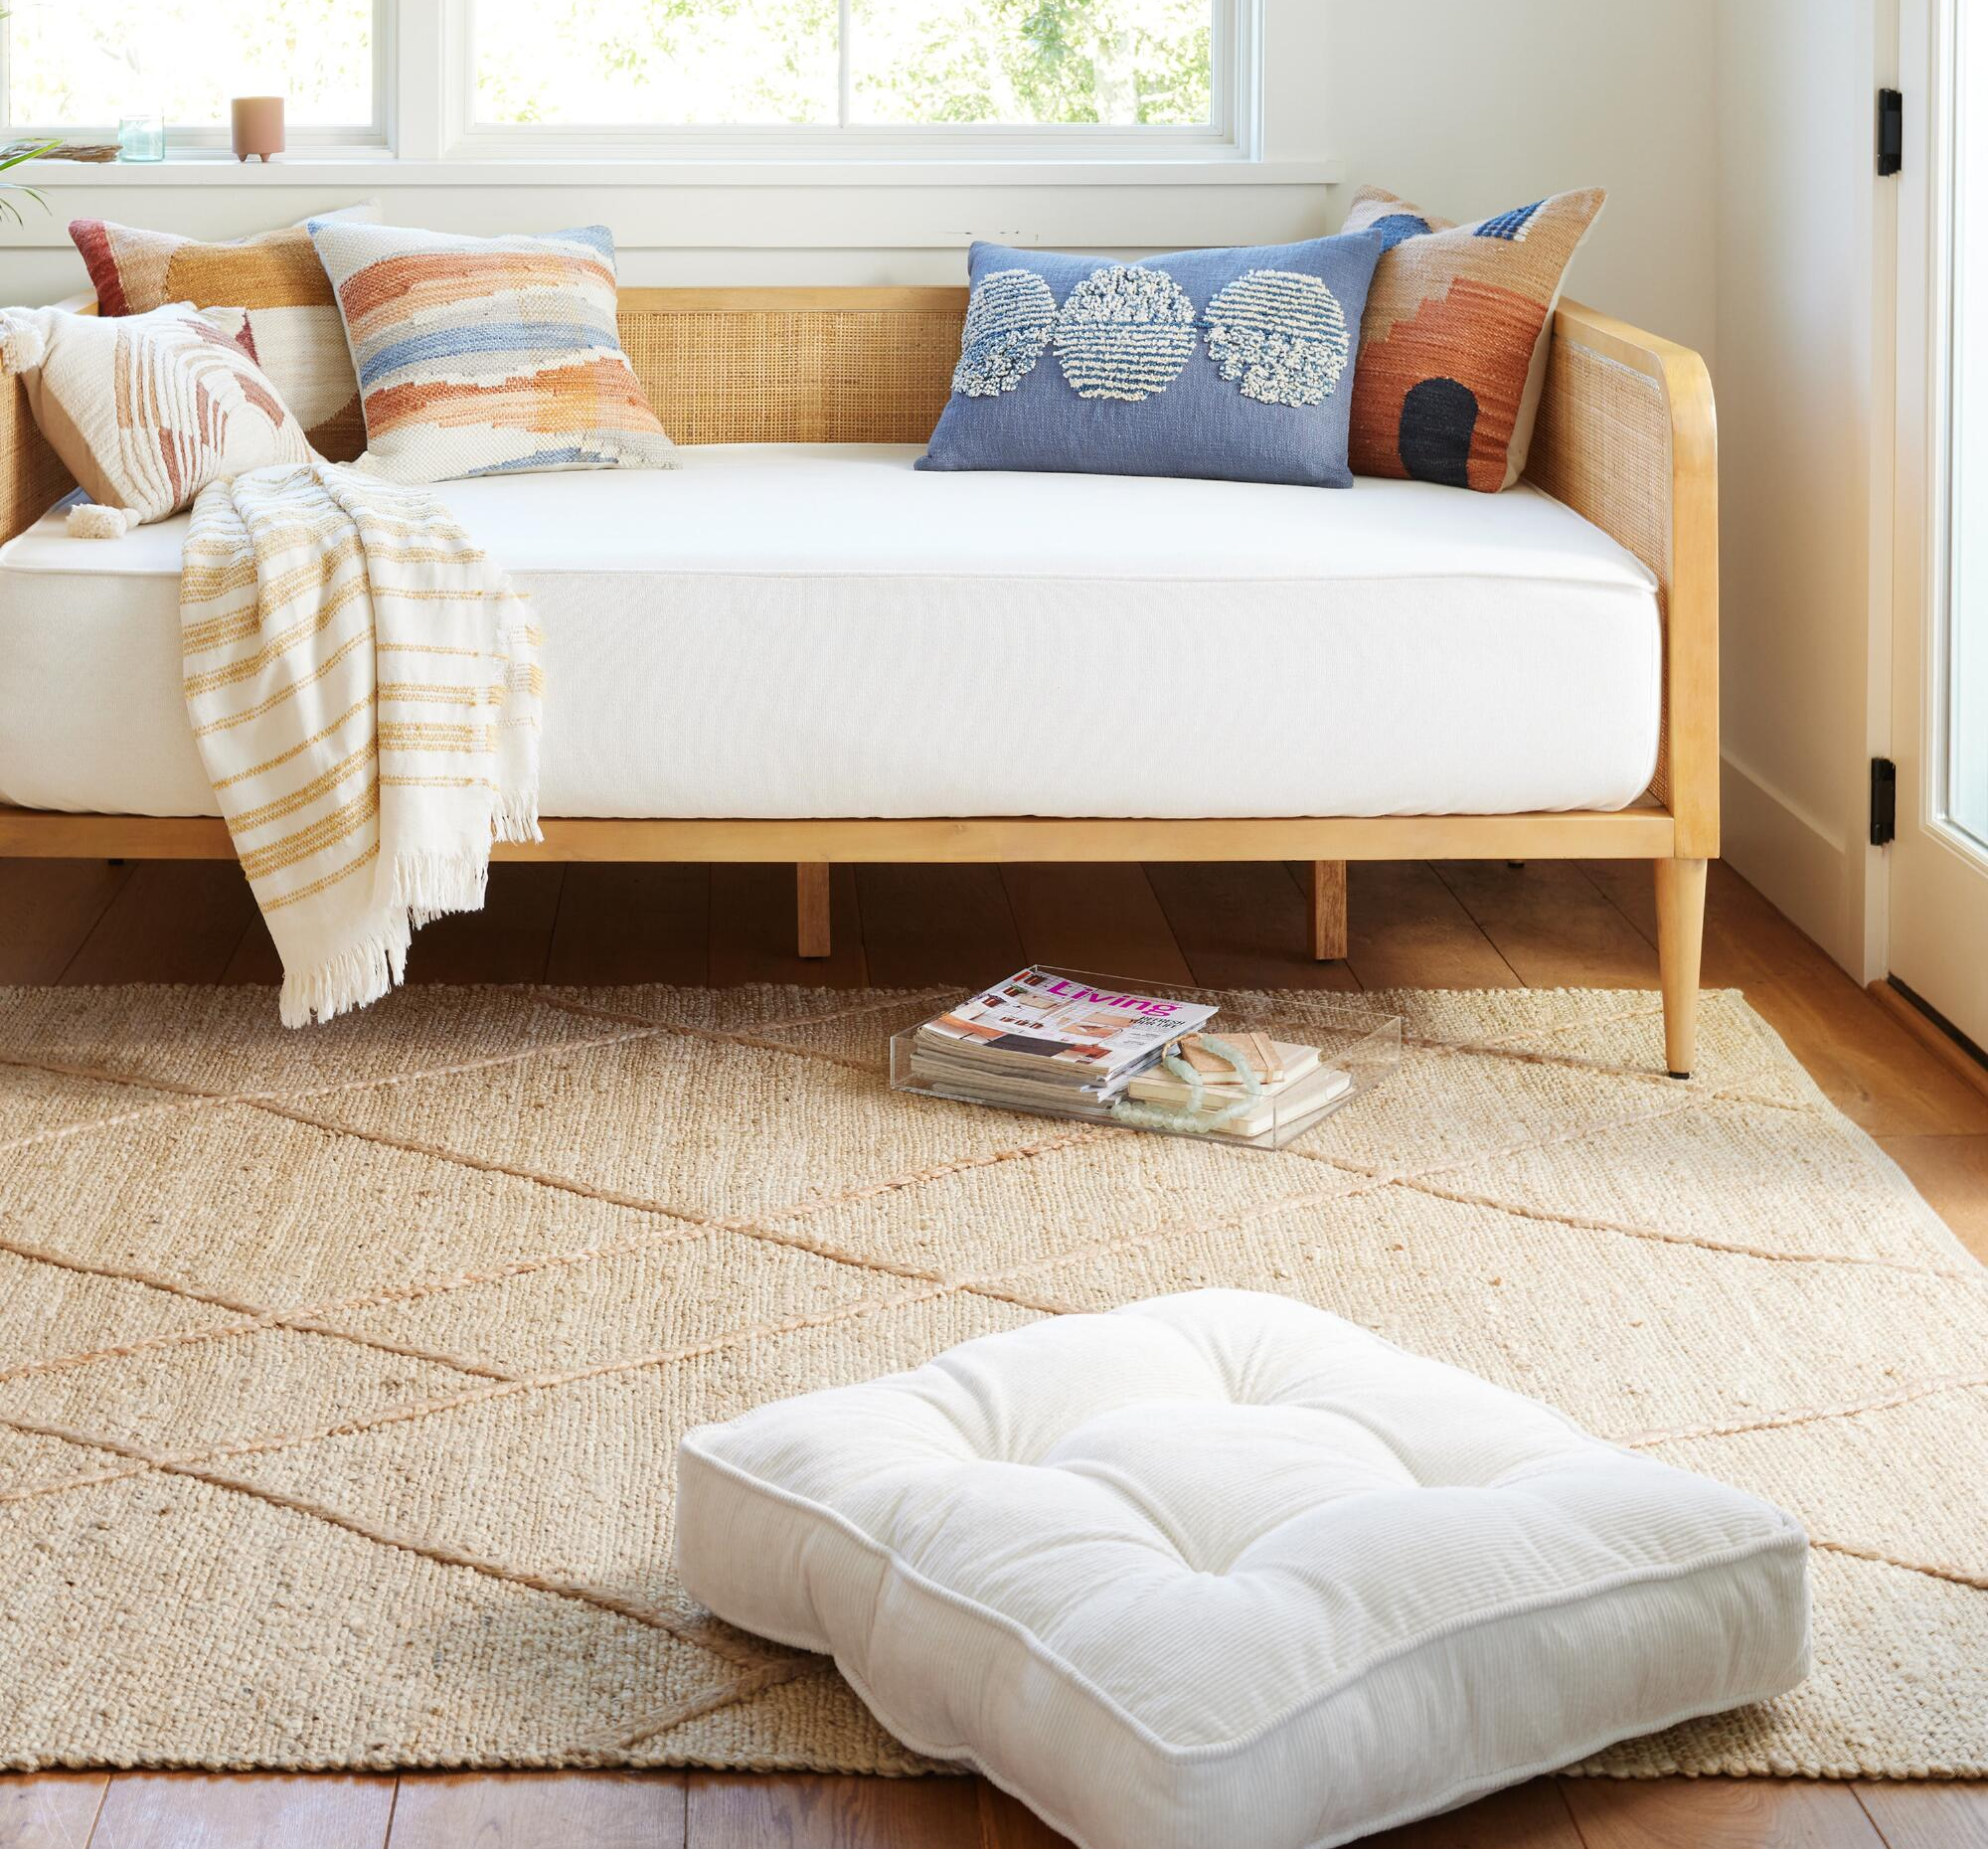 8 of the Most Comfortable Floor Pillows for Adults